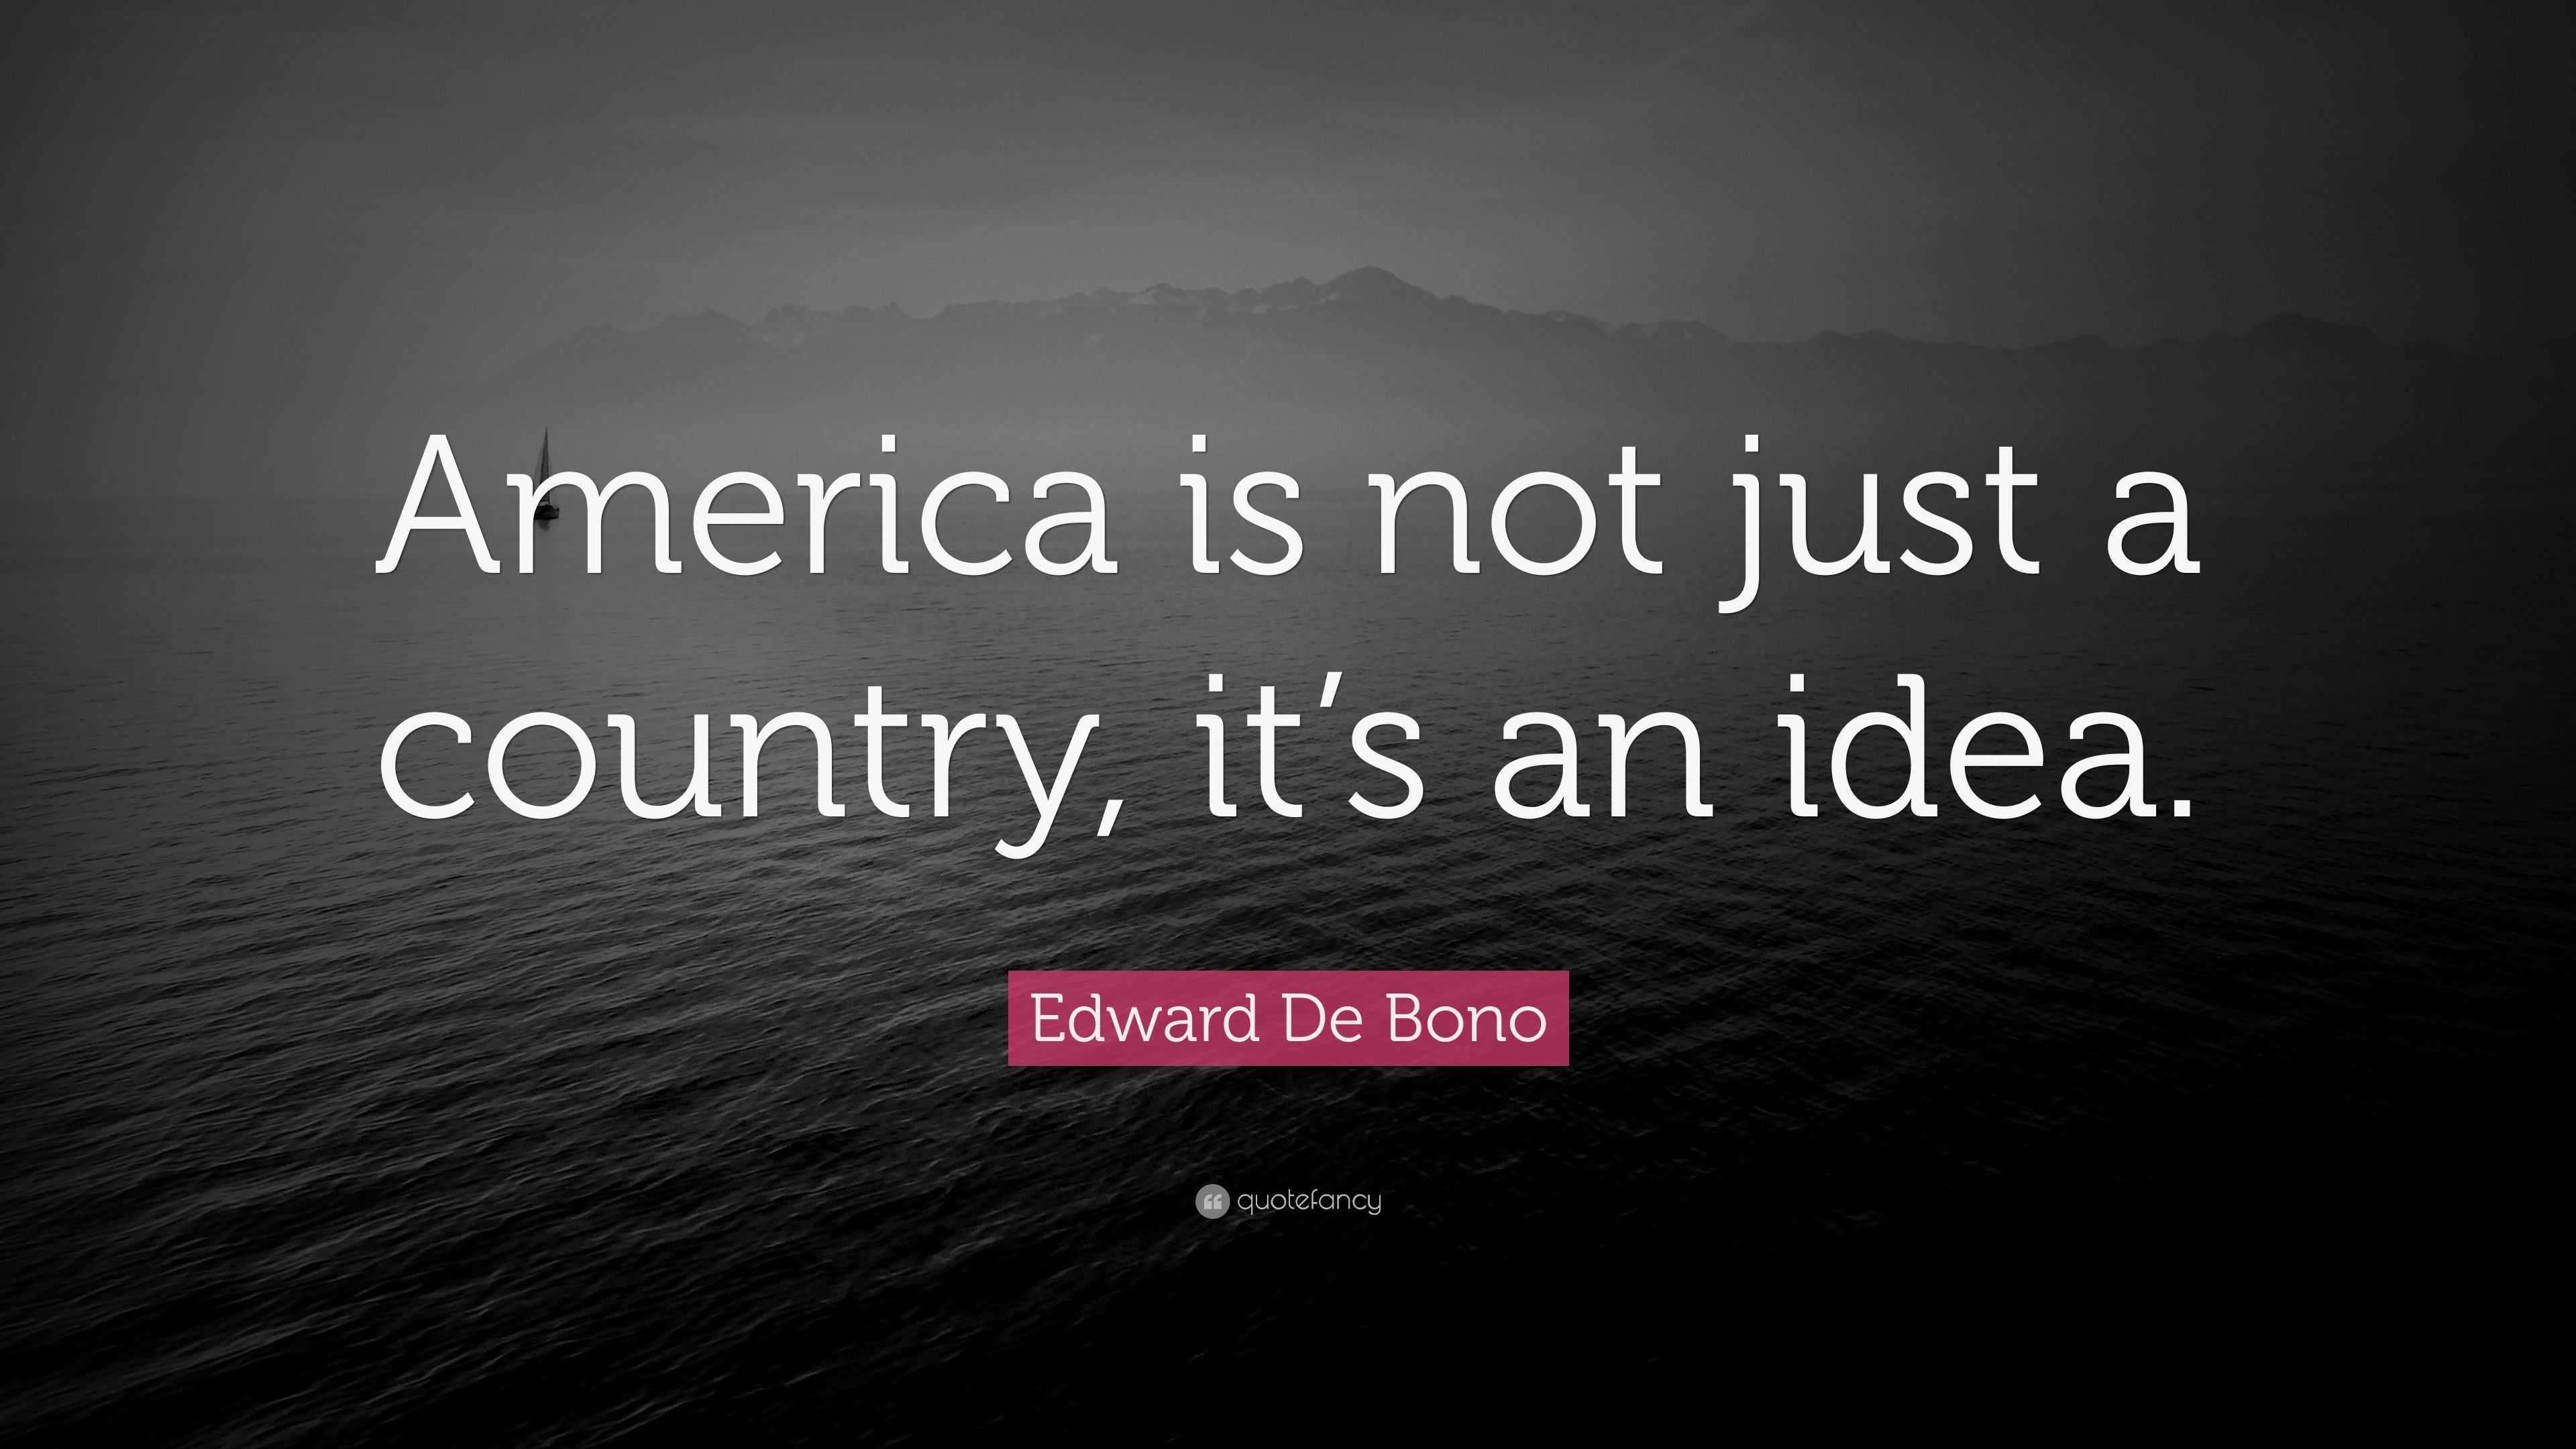 Edward De Bono Quote: "America is not just a country, it's an idea."